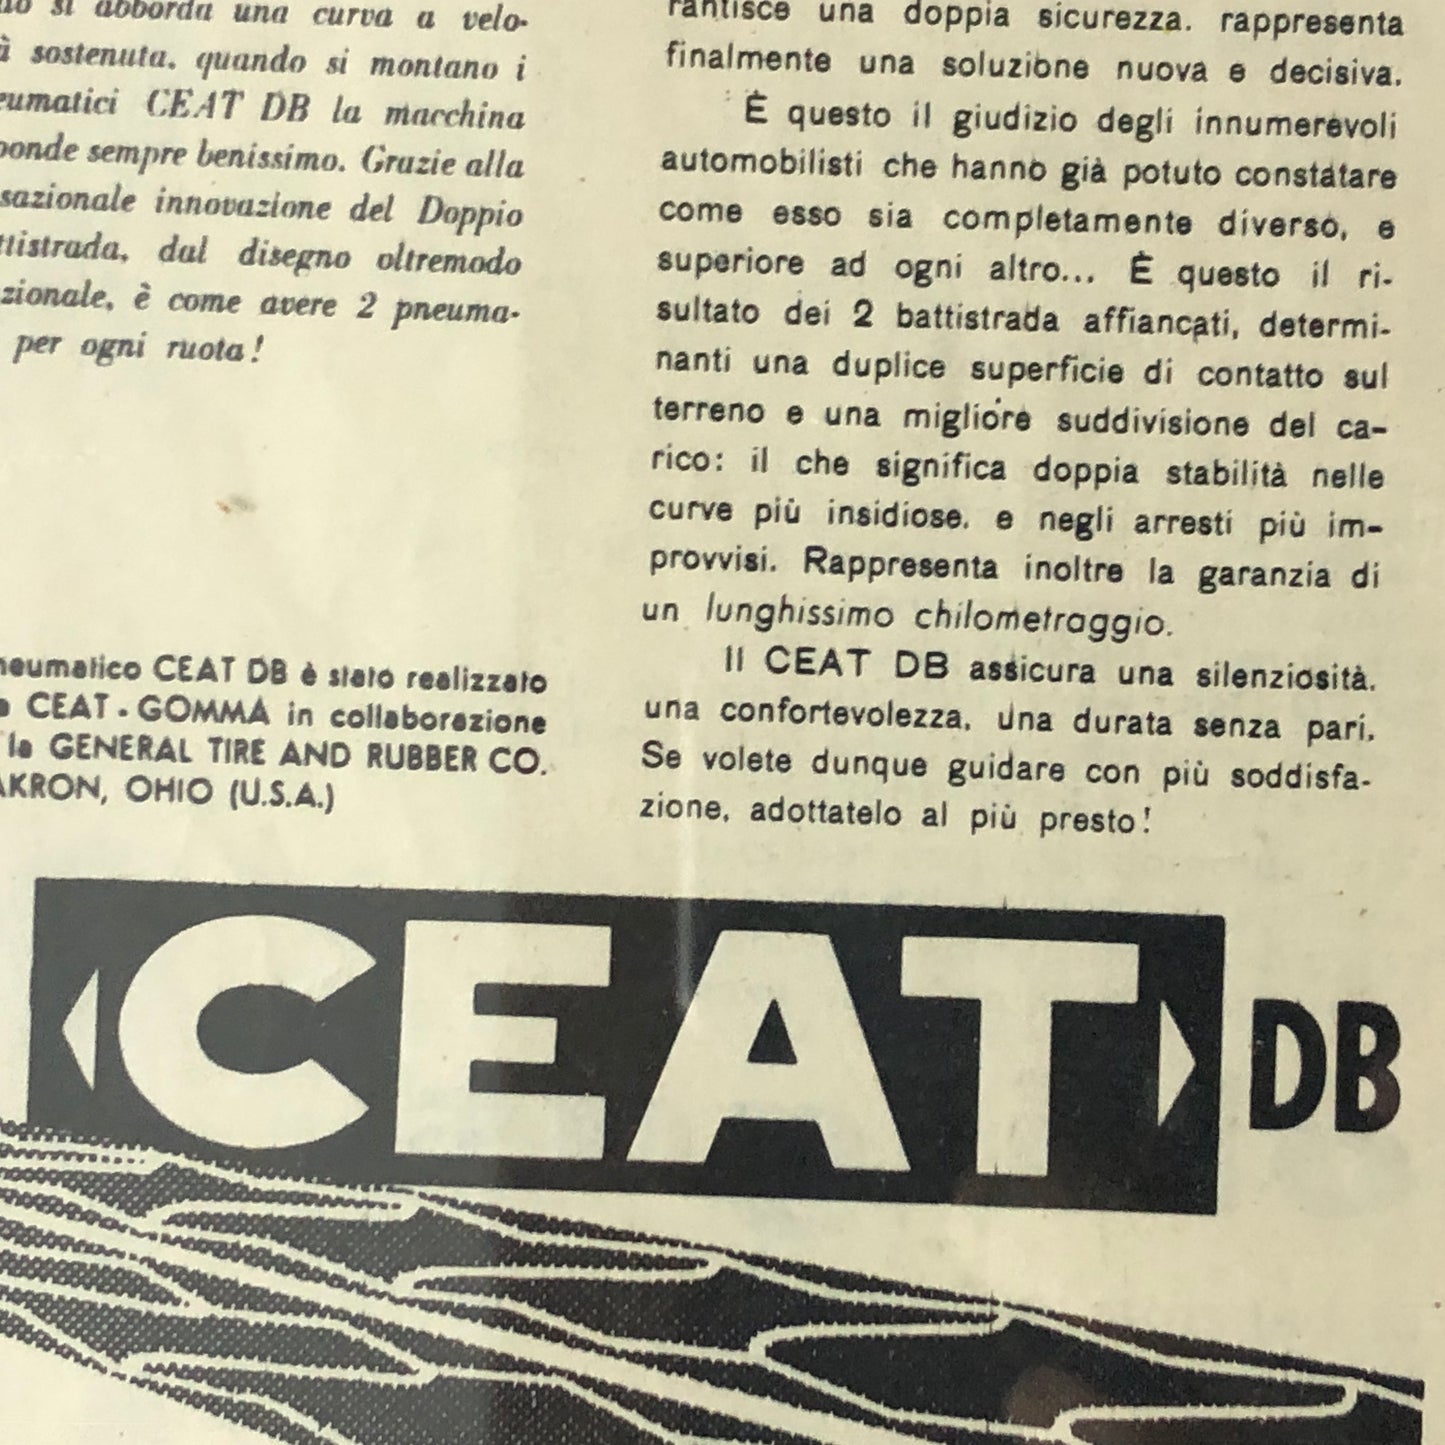 CEAT, Advertisement Year 1959 CEAT DB Tires with Caption in Italian